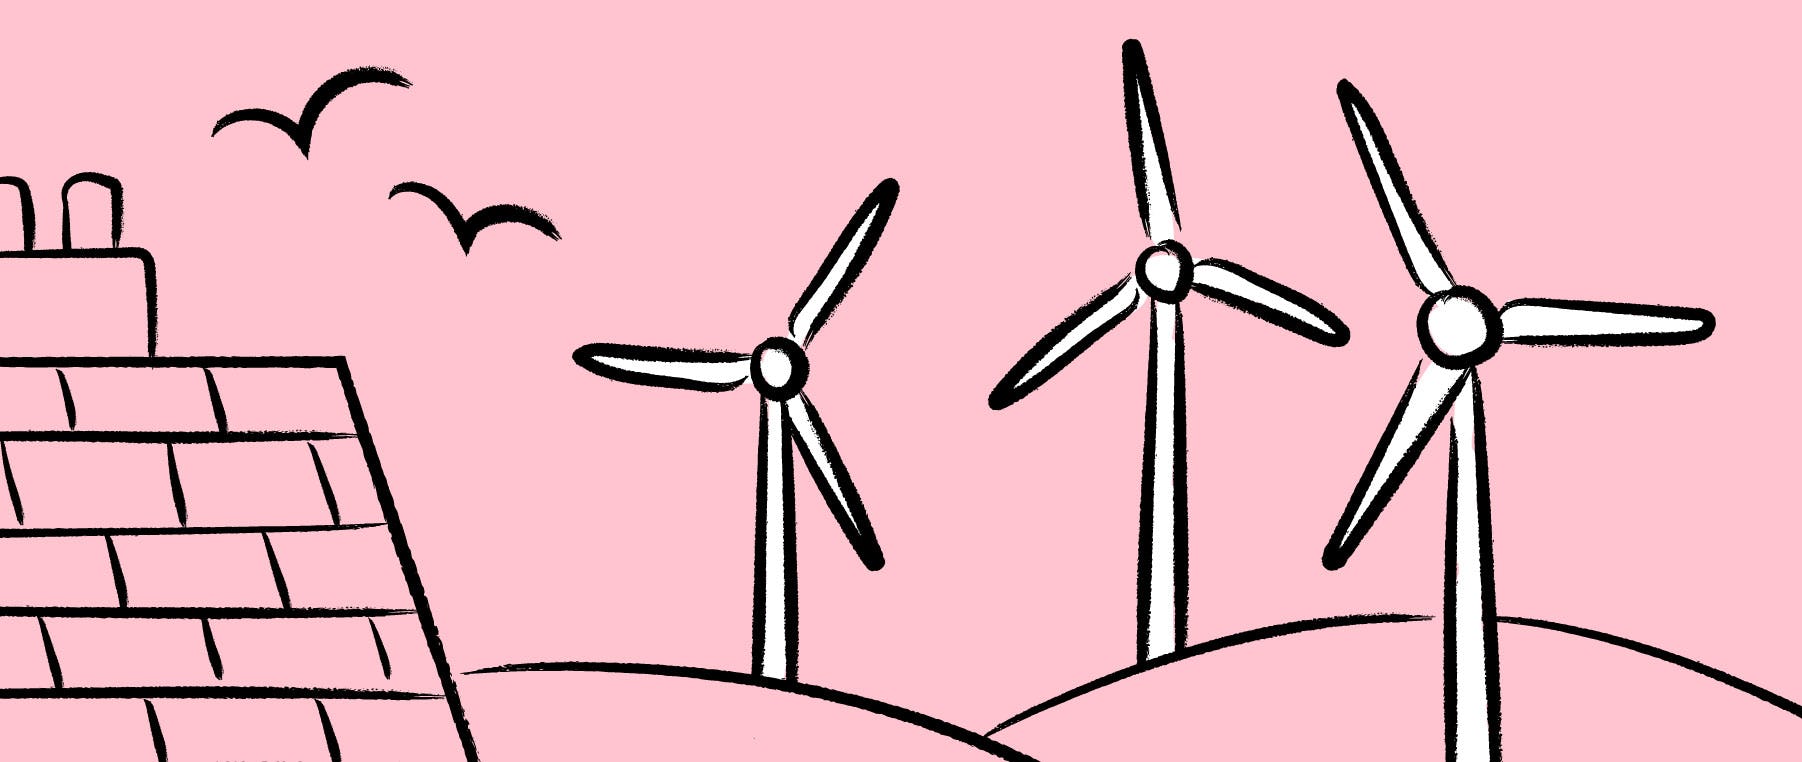 Windmills for sustainable energy